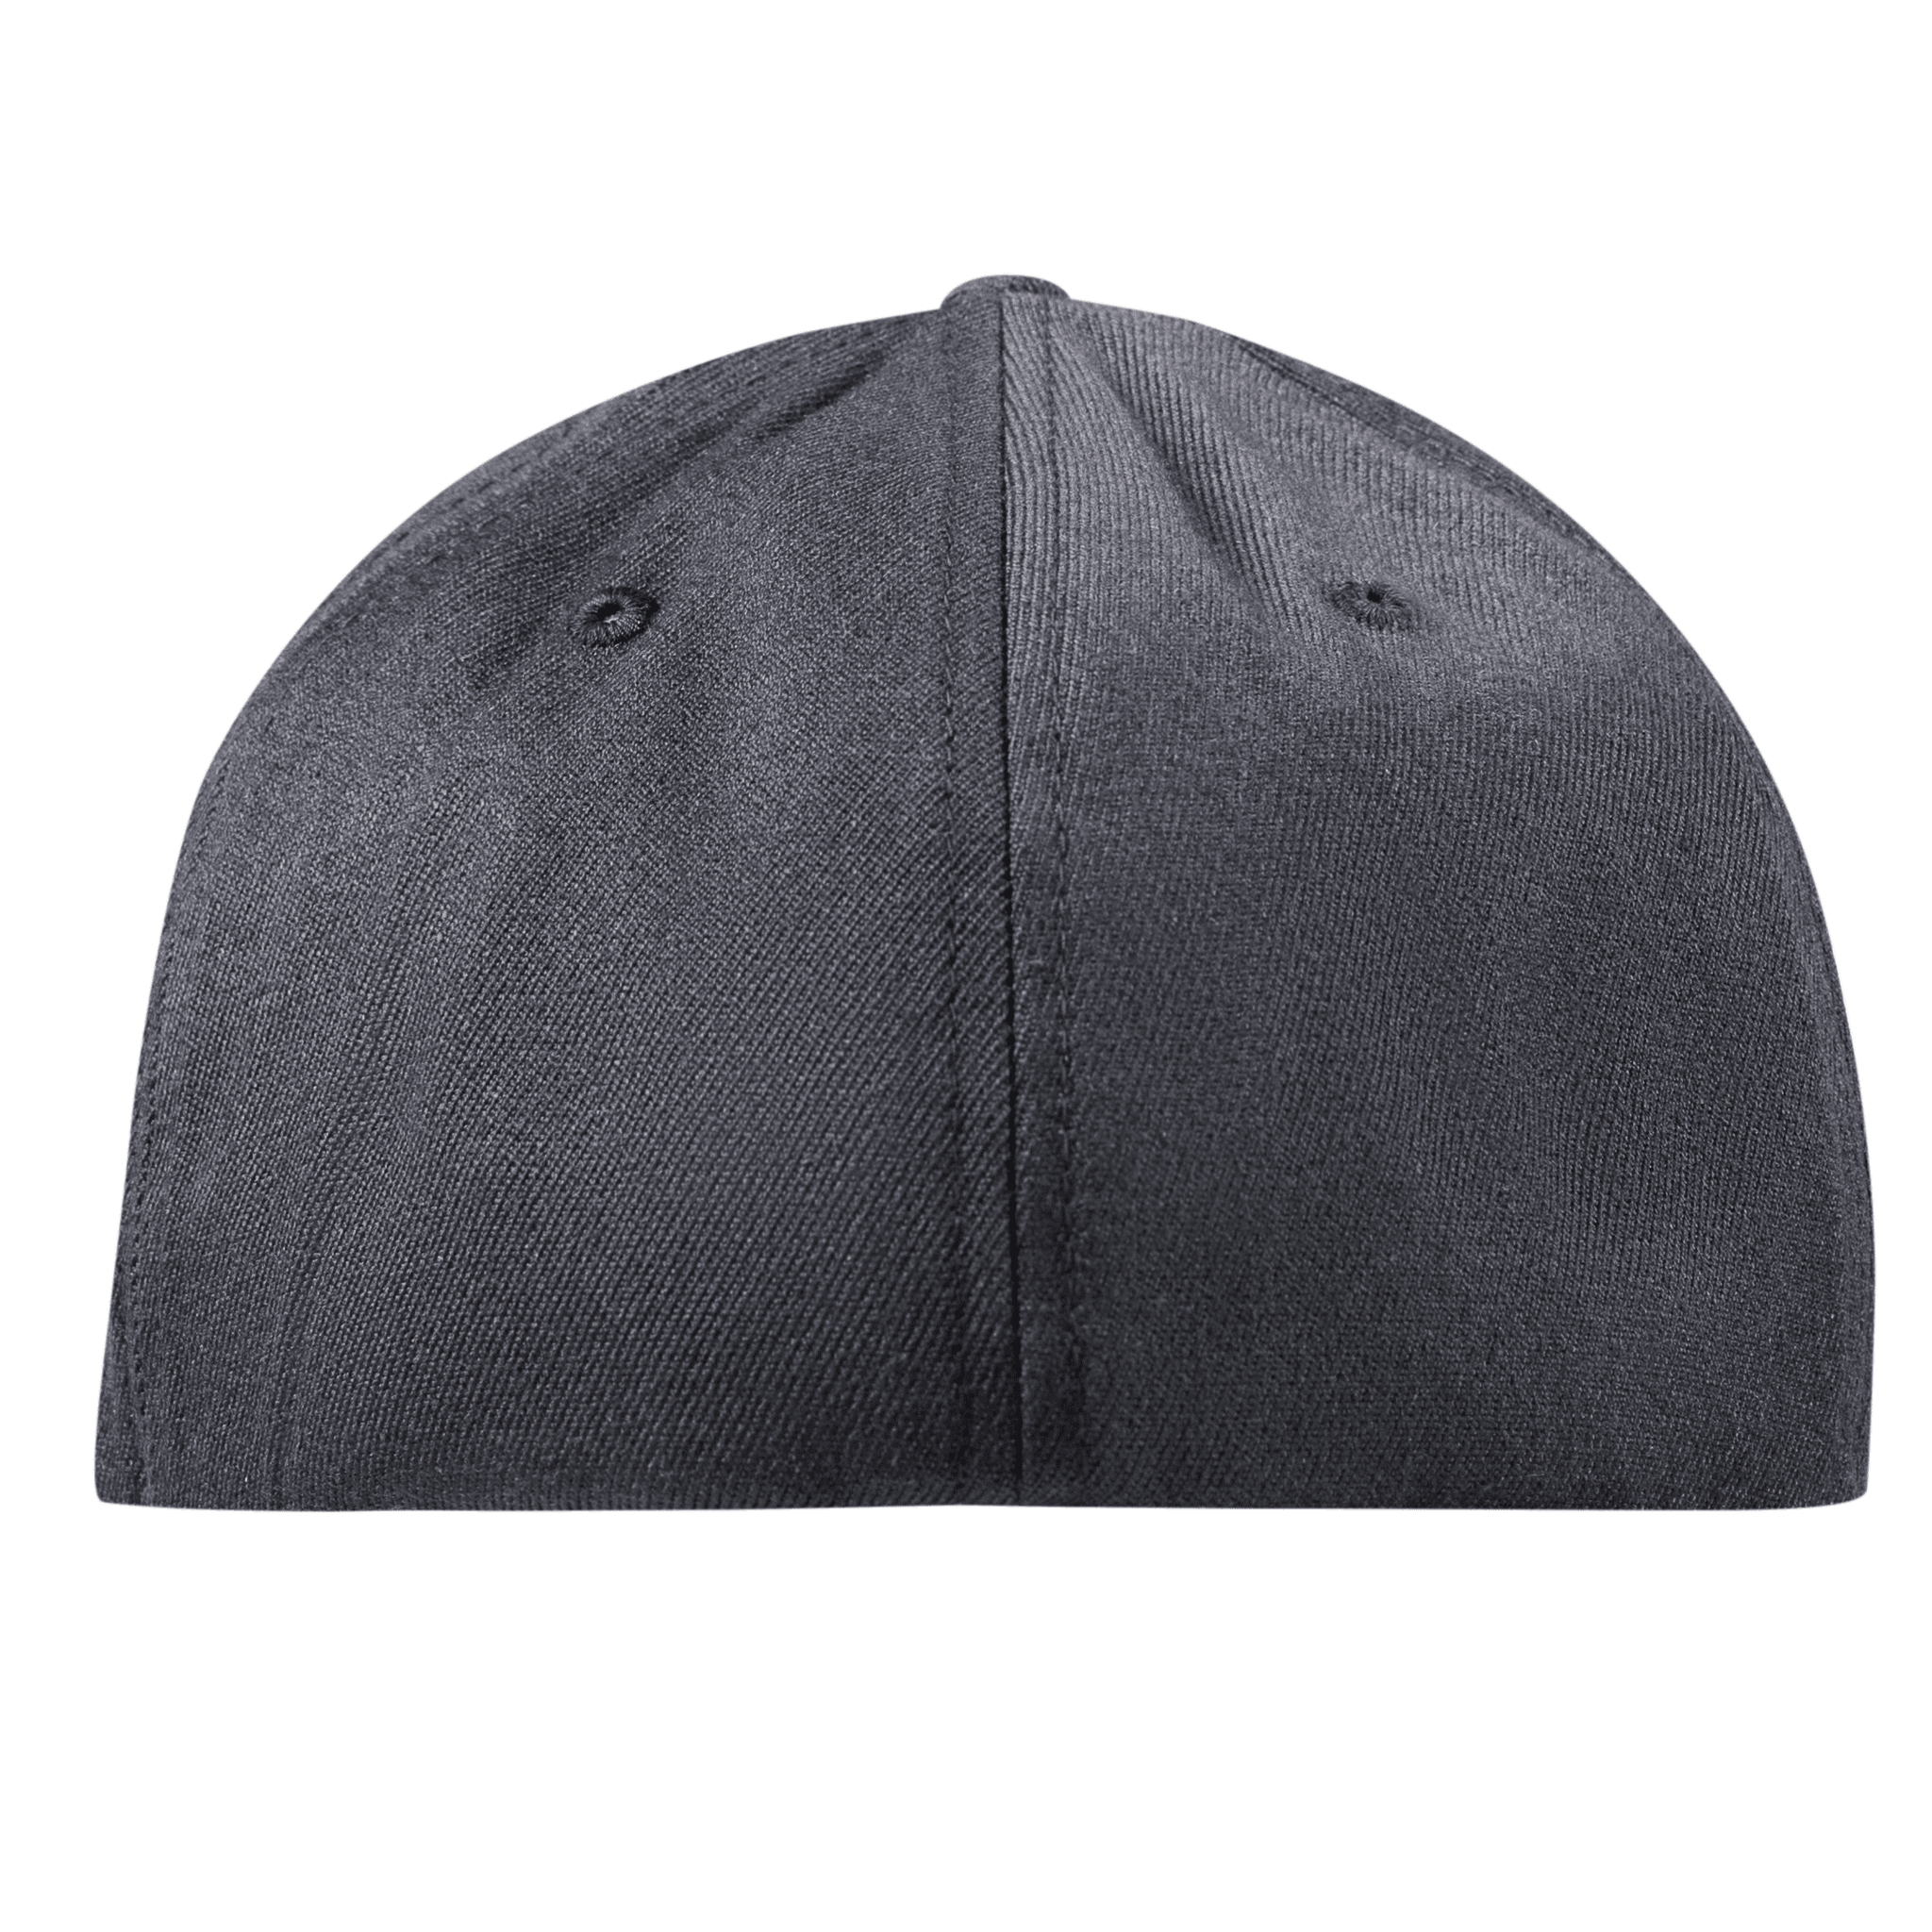 Ohio Vintage Flexfit Fitted Back Charcoal